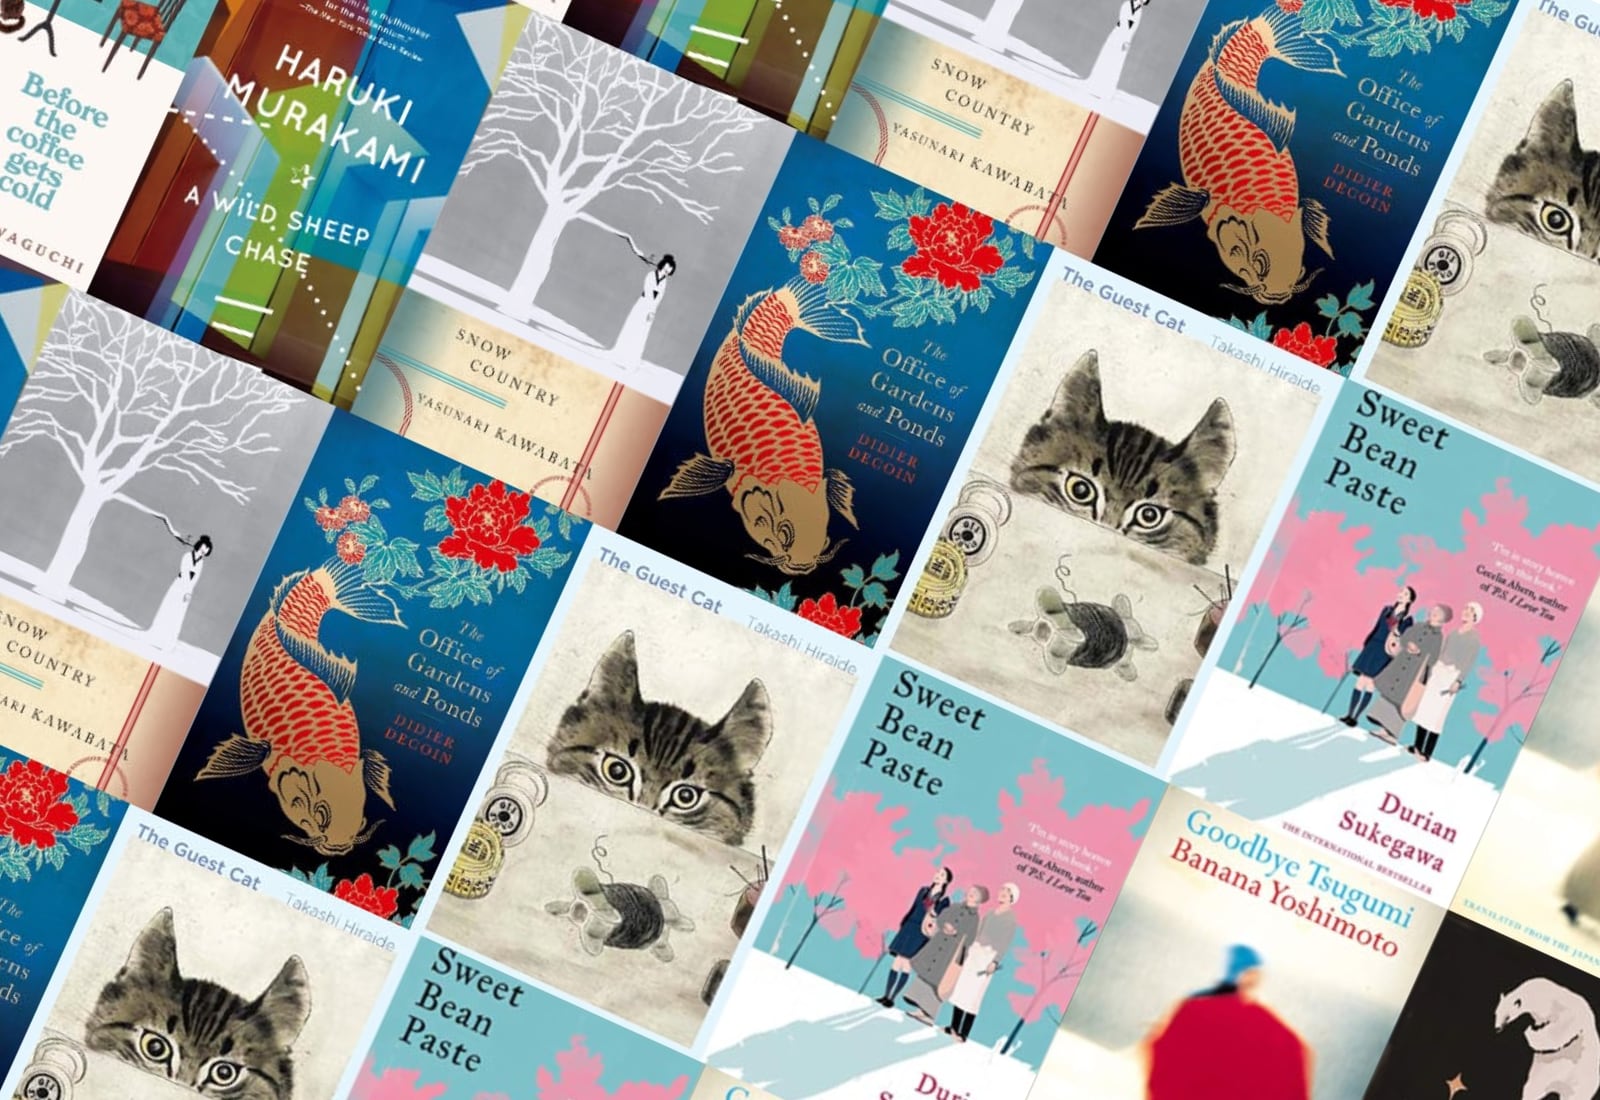 8 Heartwarming Japanese Books To Read This Winter - Savvy Tokyo